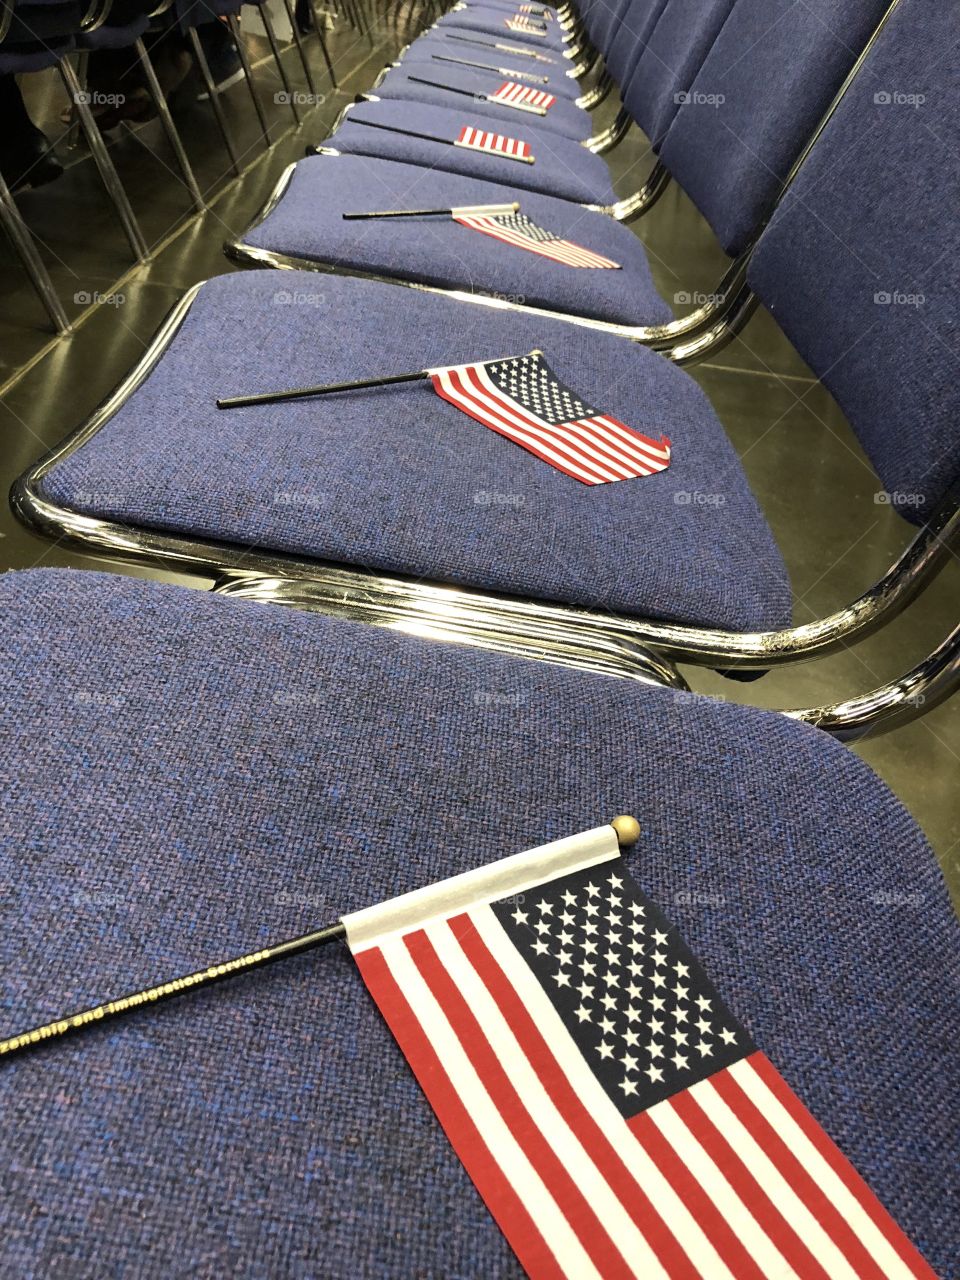 Citizenship Oath flags and seats 